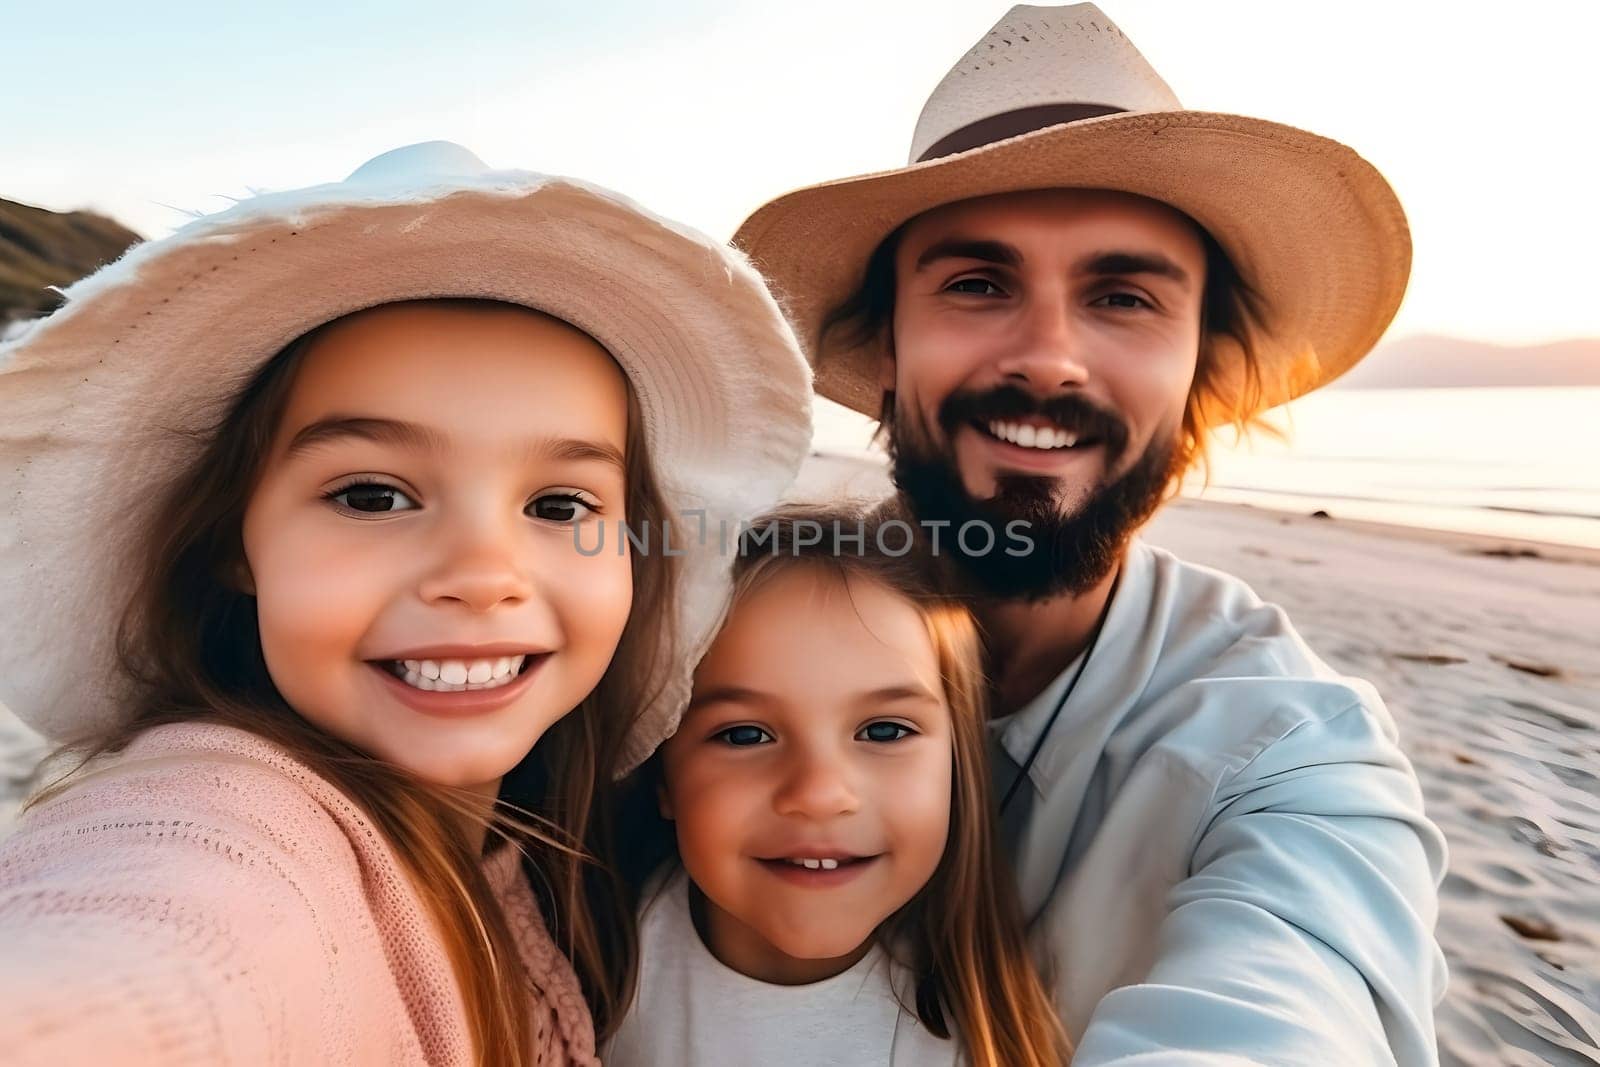 Happy family spending good time at the beach together - selfie style, neural network generated picture. Digitally generated image. Not based on any actual person, scene or pattern.